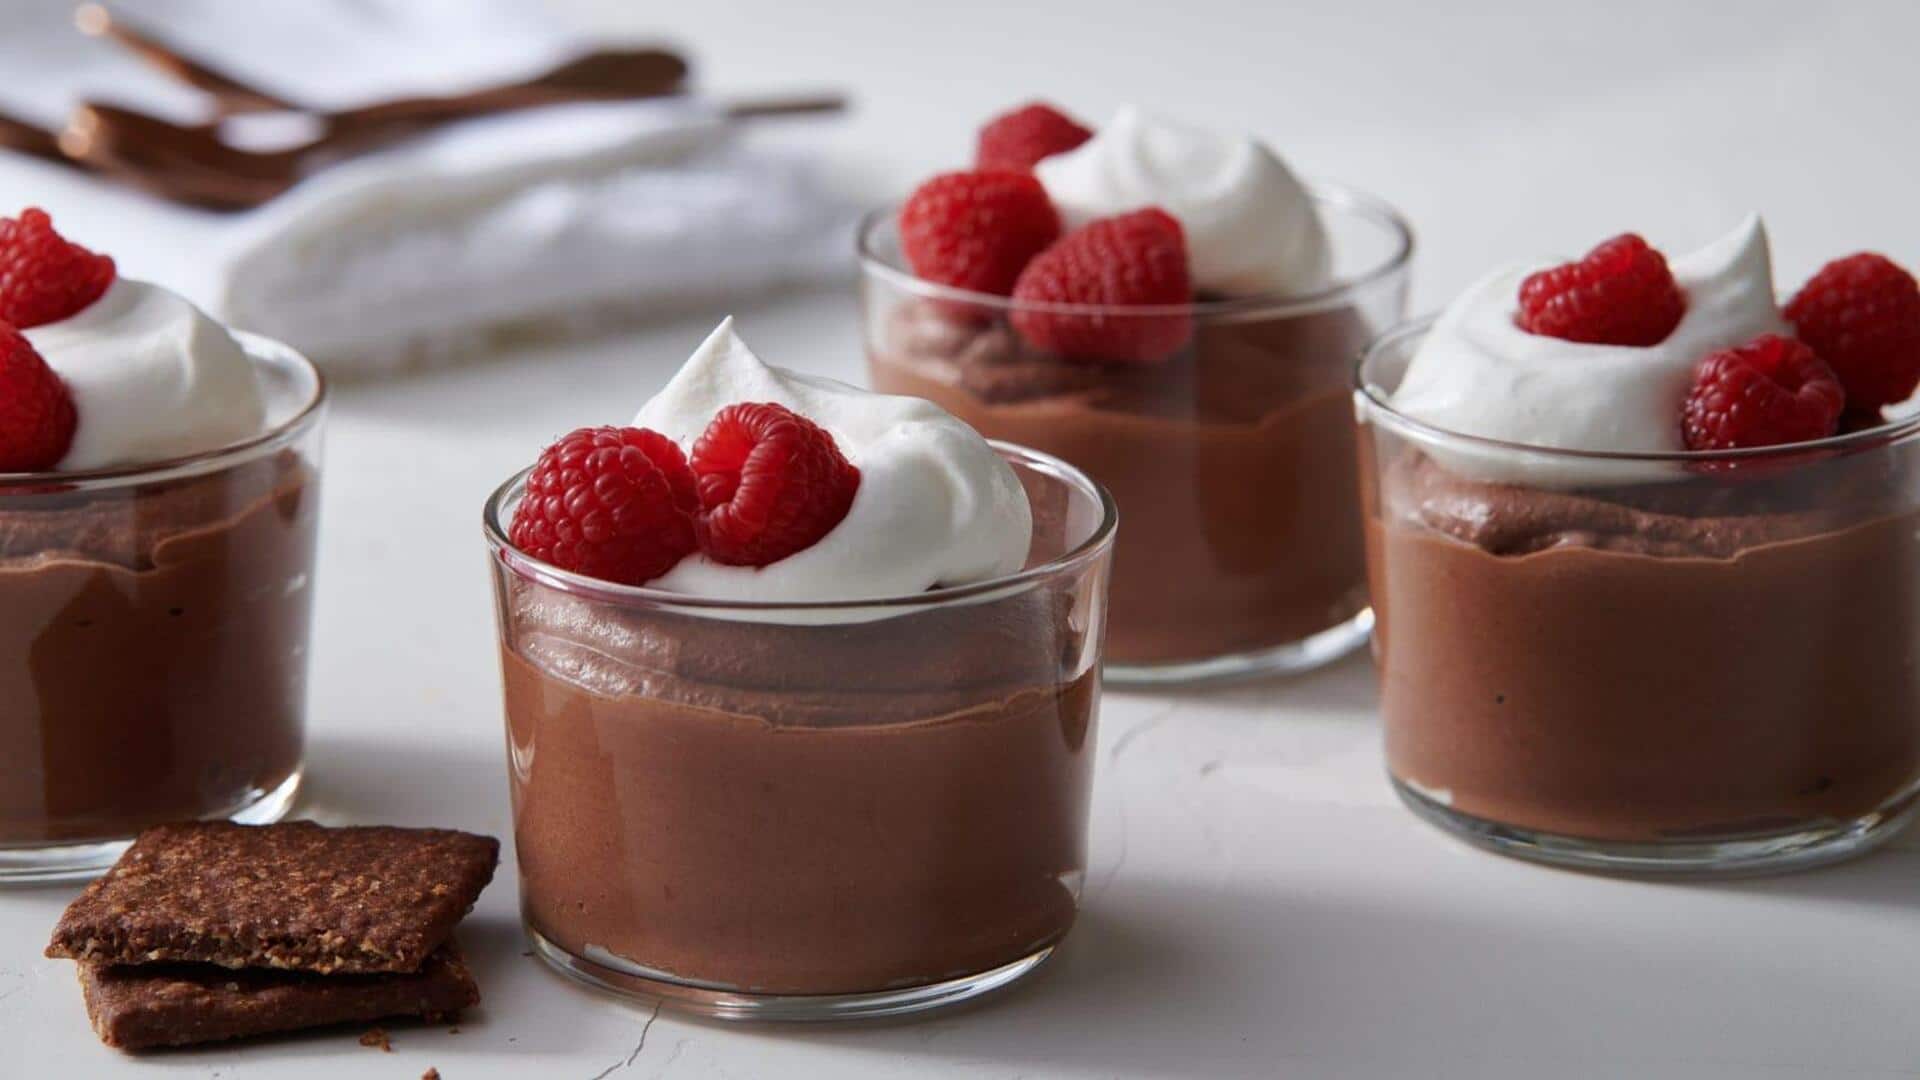 Try this vegan chocolate mousse recipe for a 'sweet' day